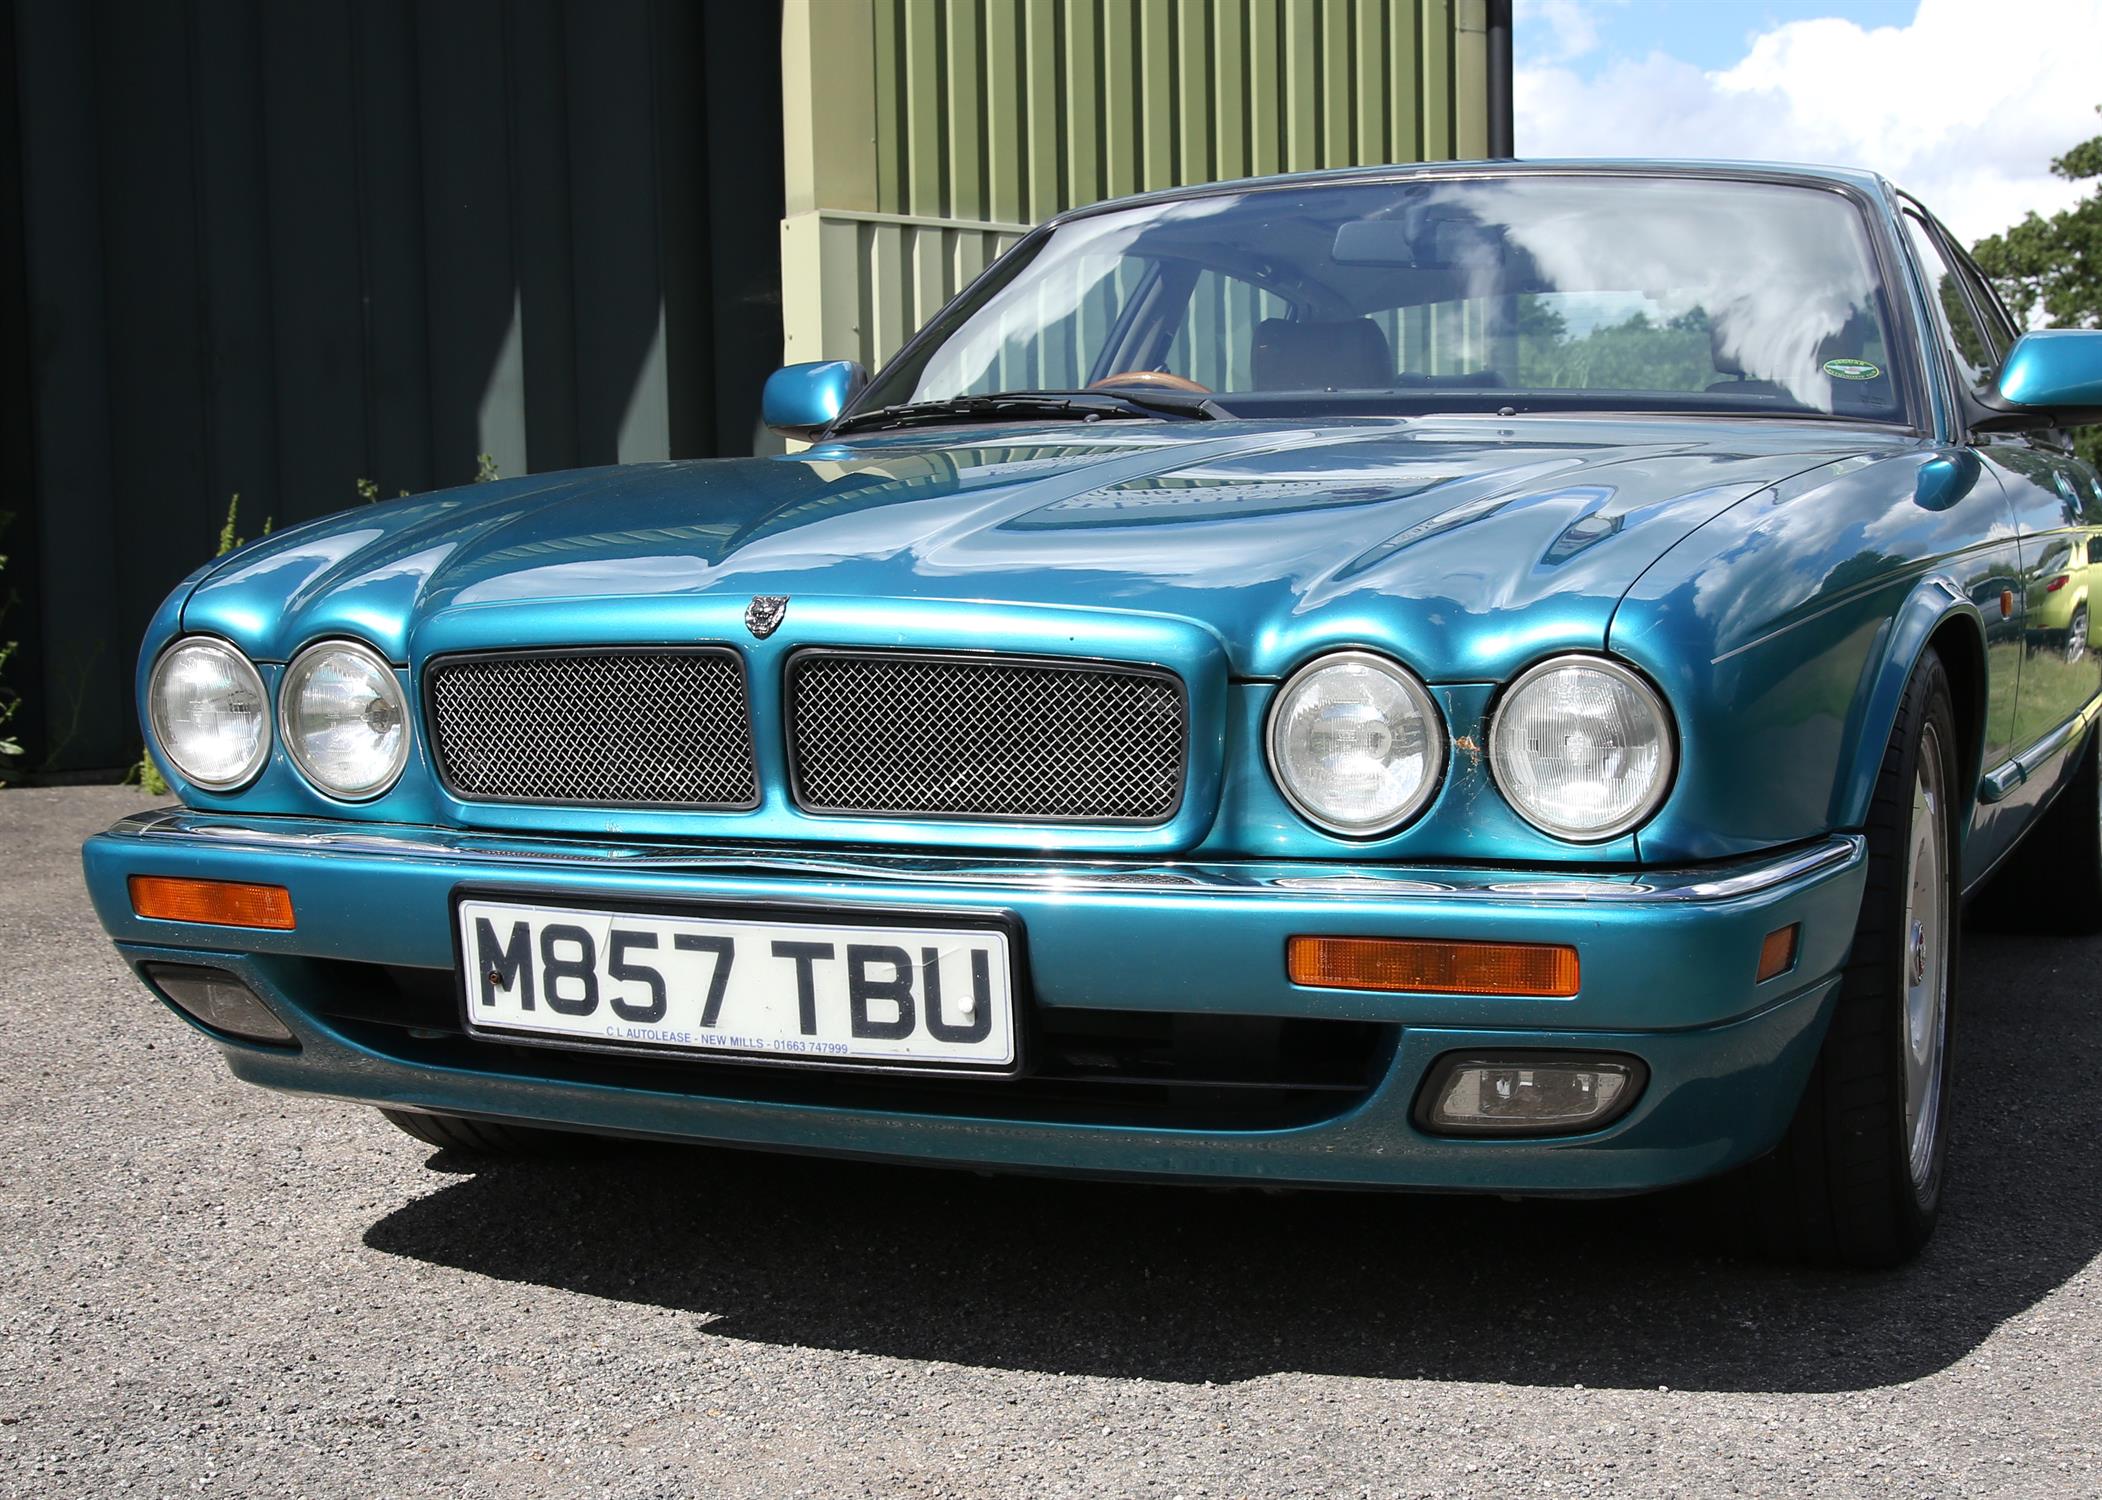 1995 Jaguar XJR Automatic, registration number M857 TBU. - With fitted extras and history file. - Image 4 of 9